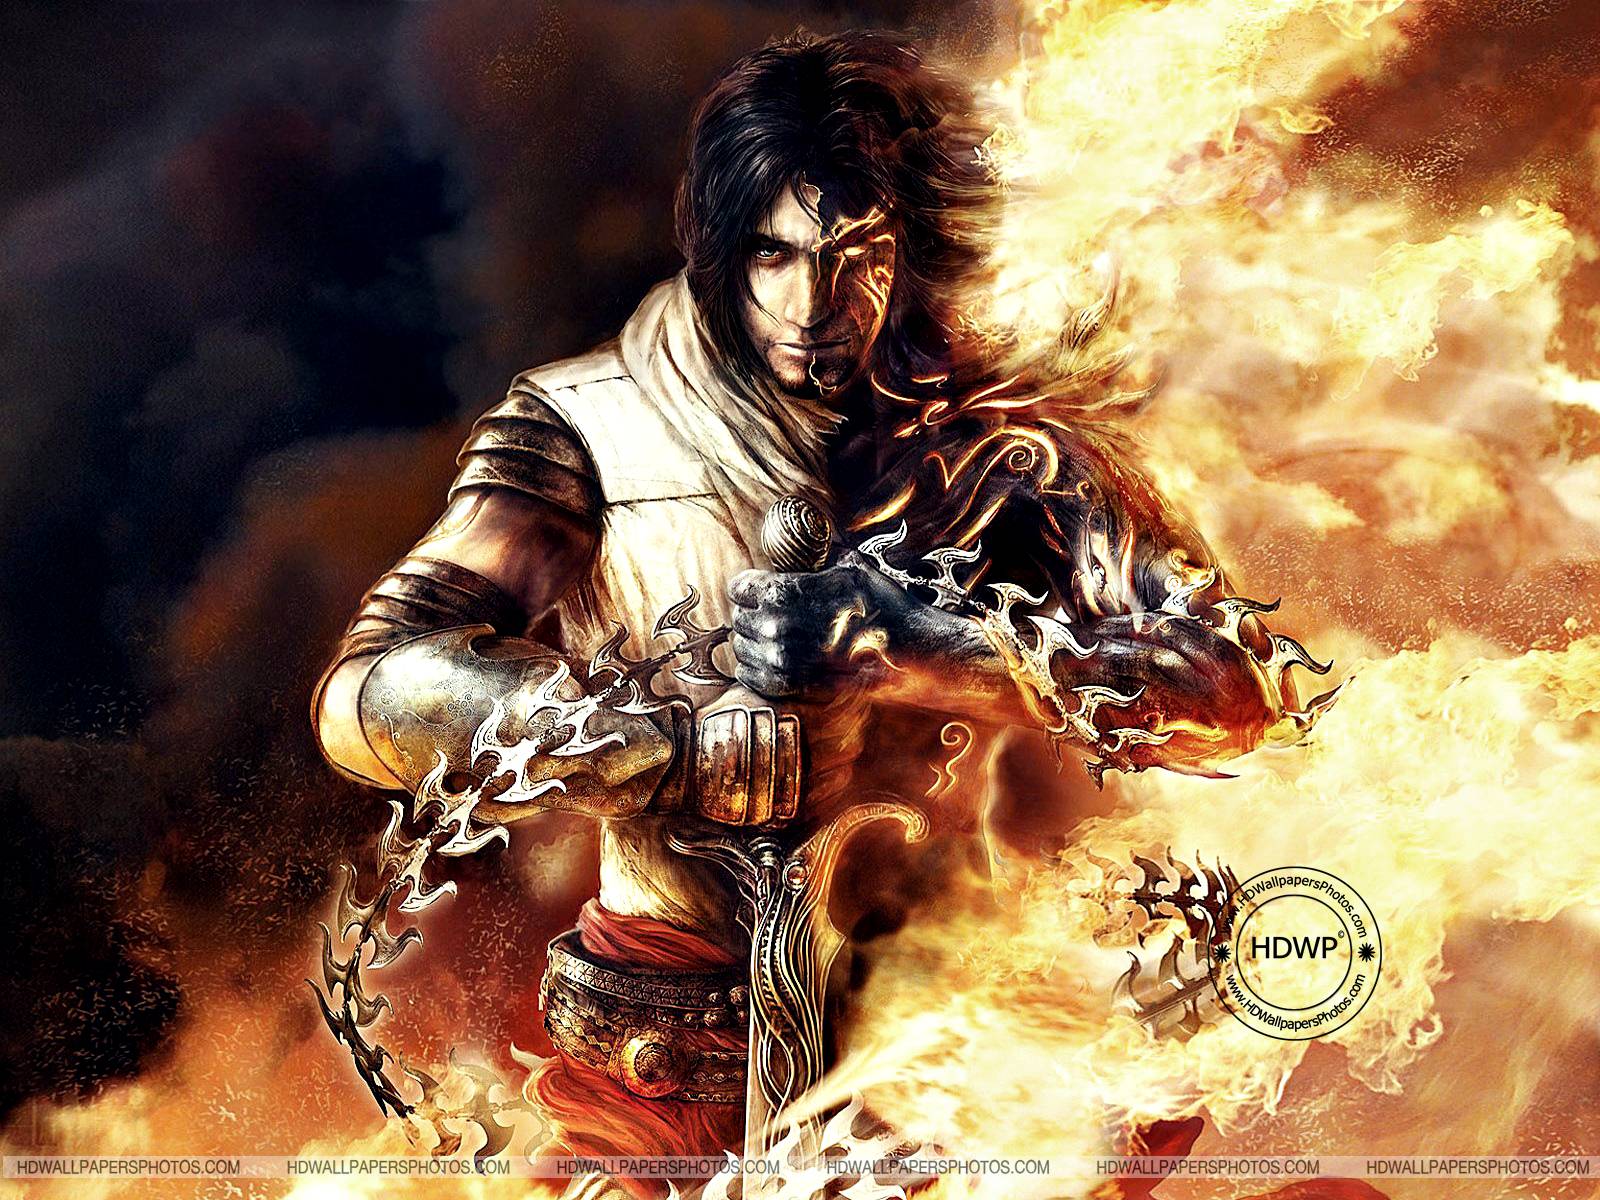 Prince Of Persia HD Wallpaper Image Pictures